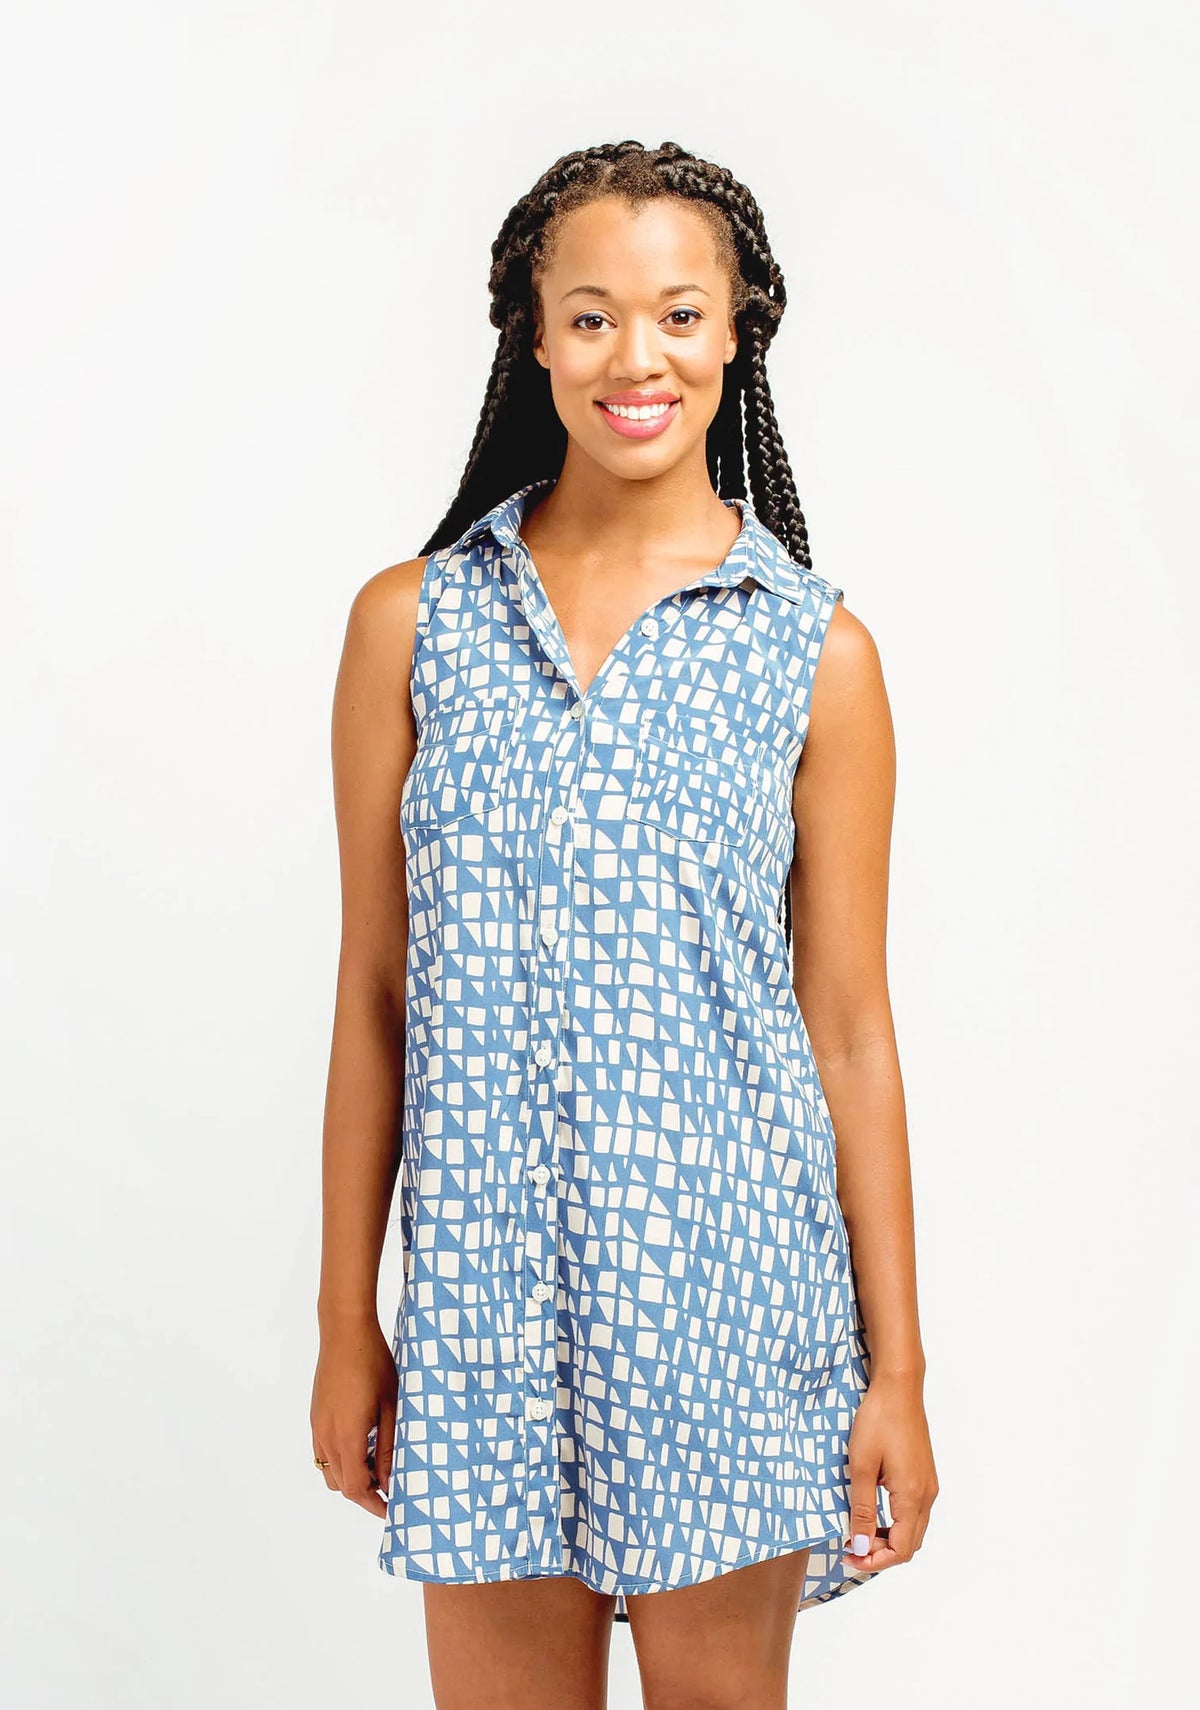 Model Lauren is wearing a size 8, view A Alder Shirtdress in a blue patterned fabric. She is modeling the front side of the shirtdress.